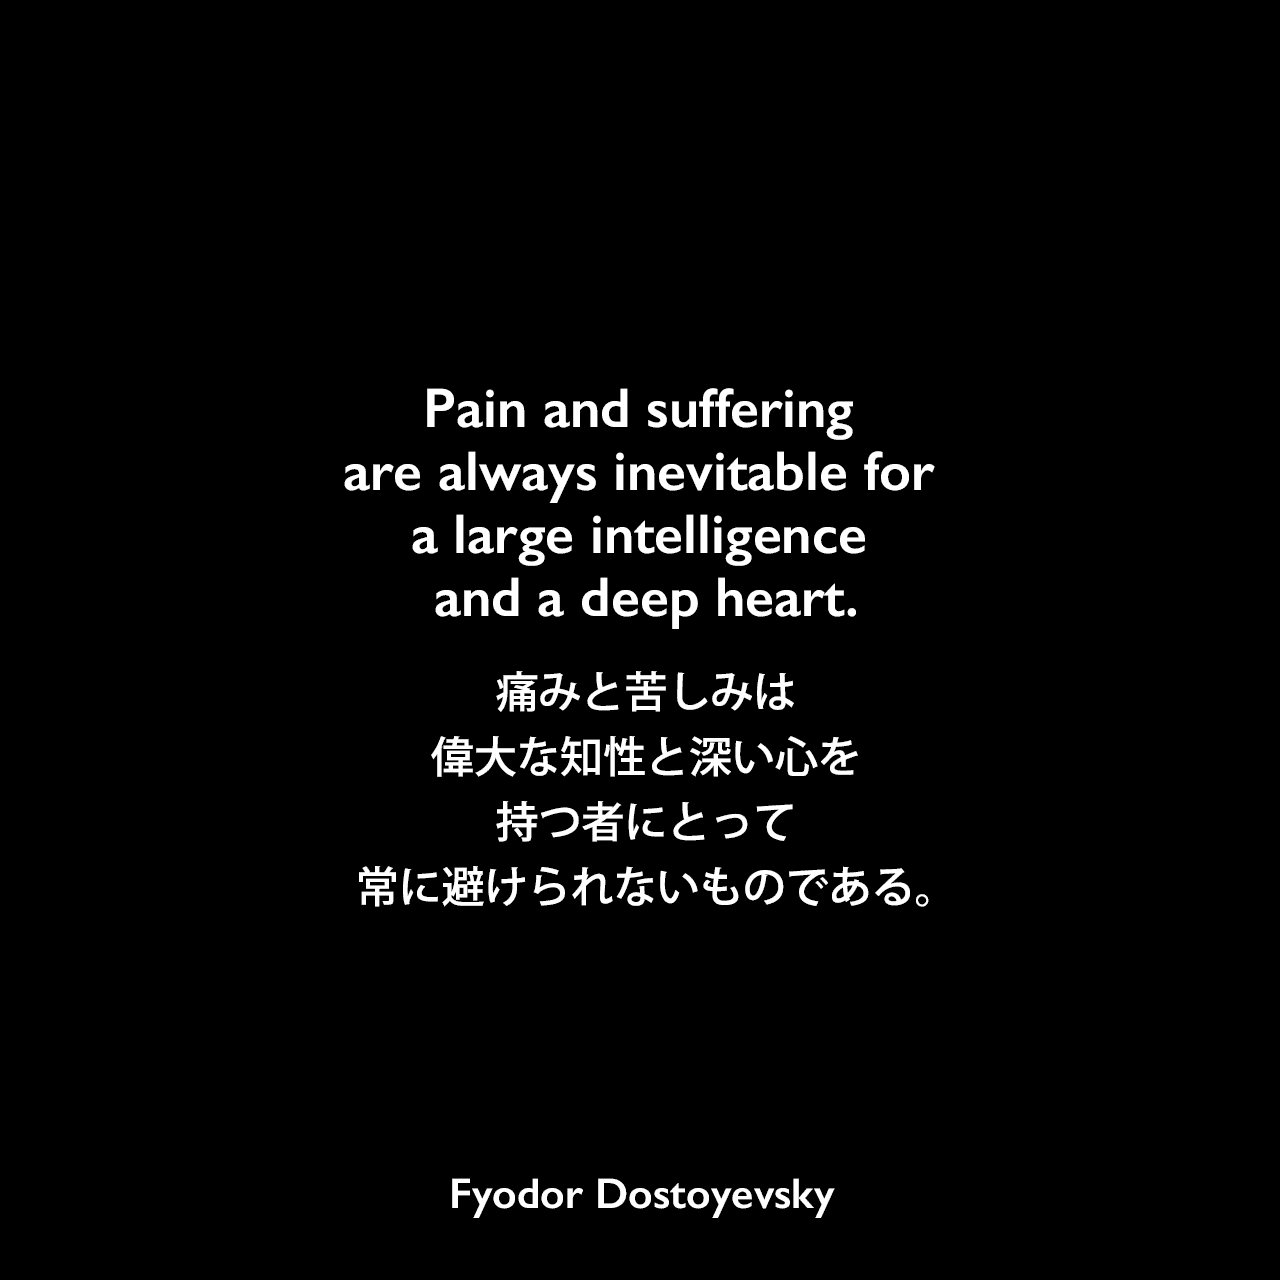 Pain and suffering are always inevitable for a large intelligence and a deep heart.痛みと苦しみは、偉大な知性と深い心を持つ者にとって、常に避けられないものである。- ドストエフキーの小説「罪と罰」よりFyodor Dostoyevsky